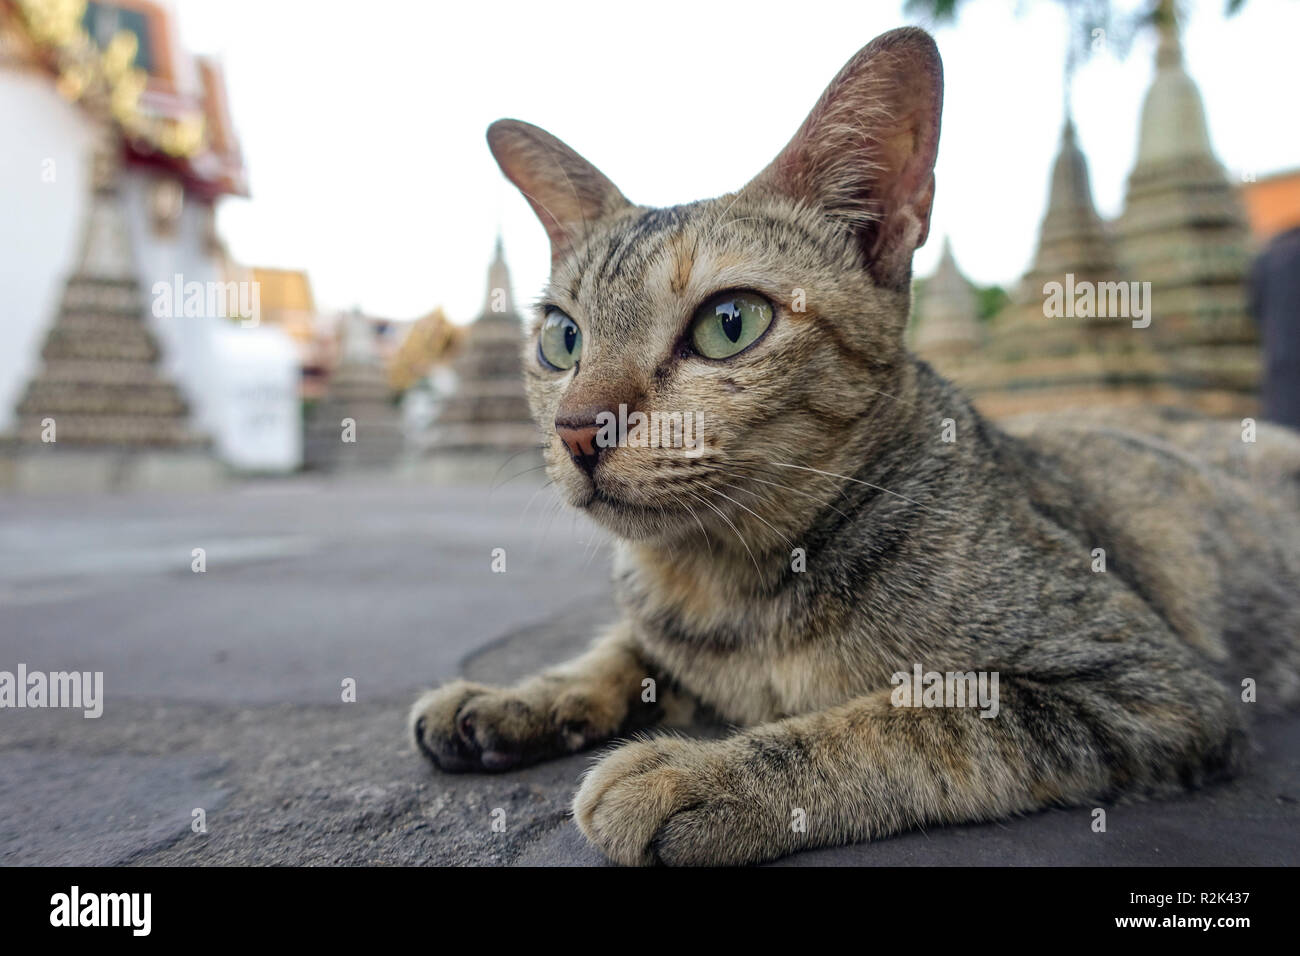 Cat at wat Po Temple, Thailand Stock Photo